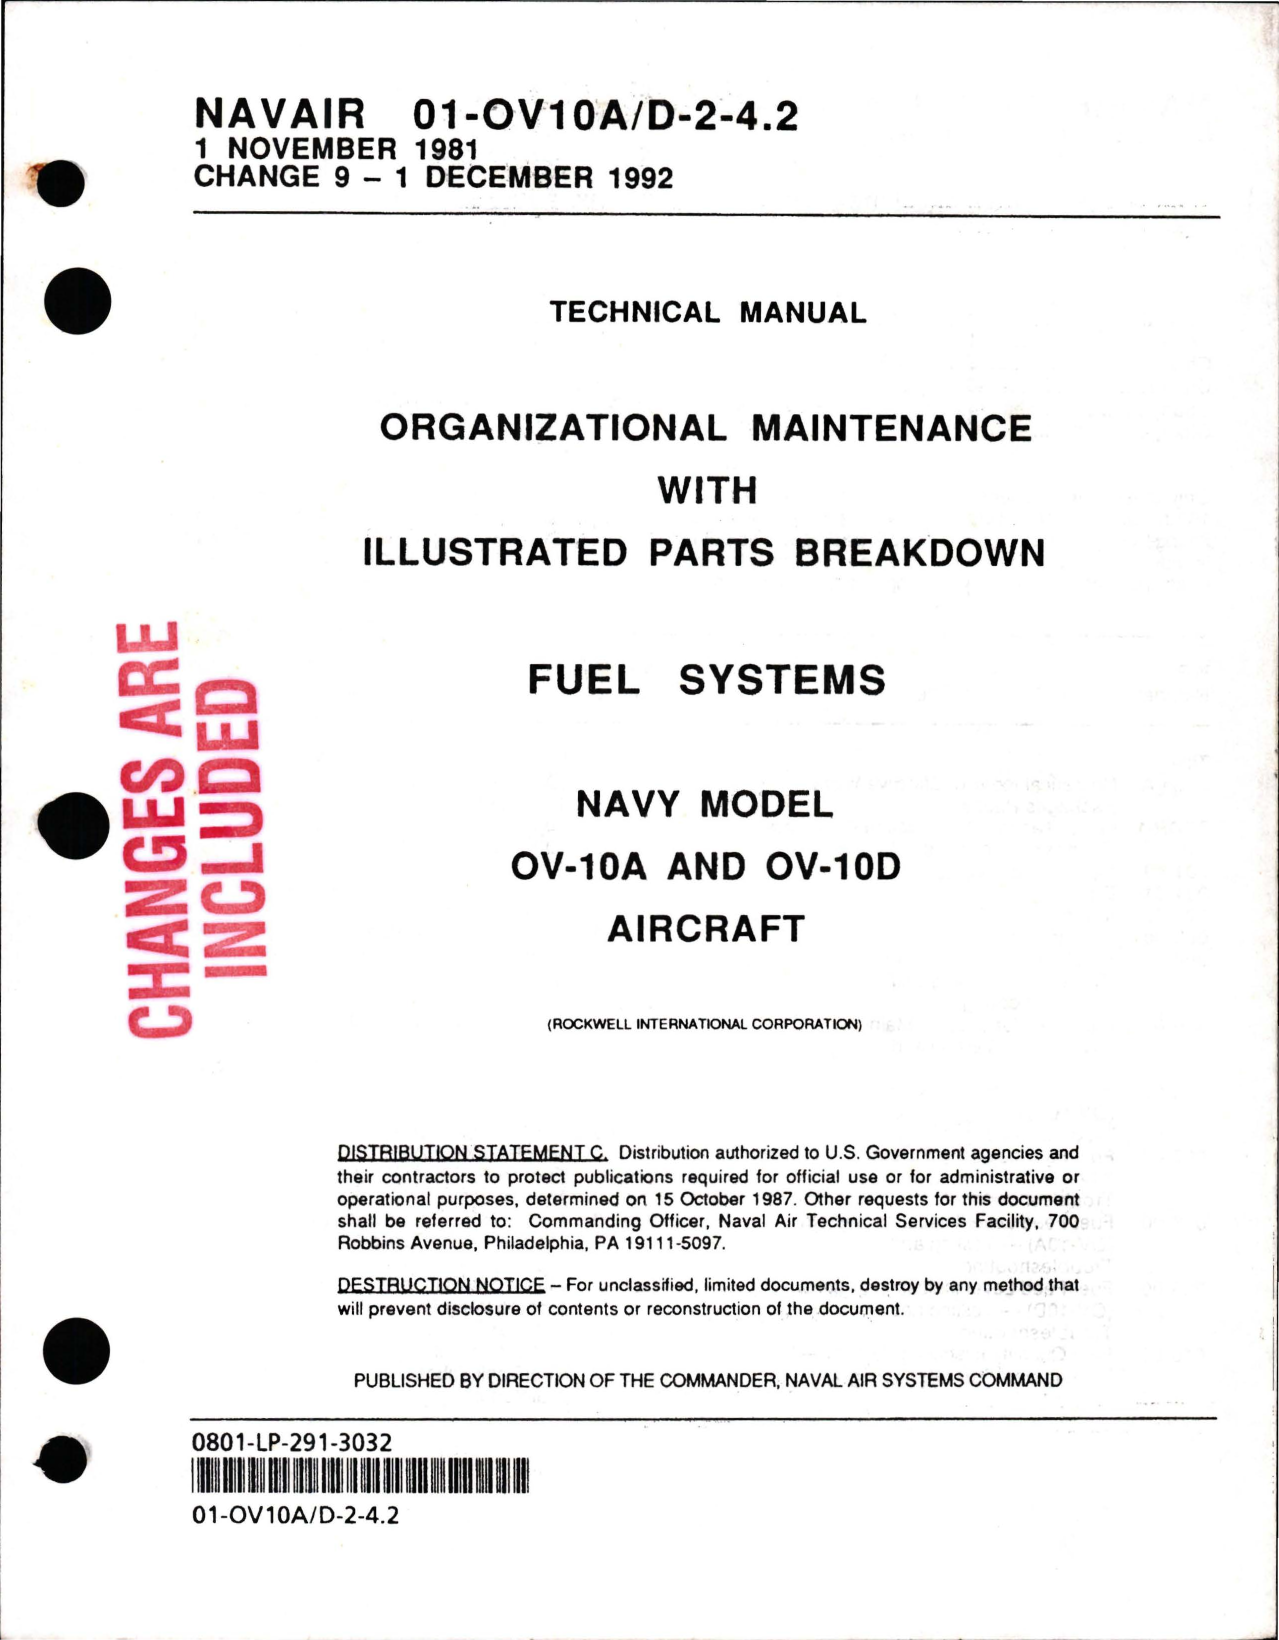 Sample page 1 from AirCorps Library document: Organizational Maintenance with Illustrated Parts Breakdown for Fuel Systems on the OV-10A/D